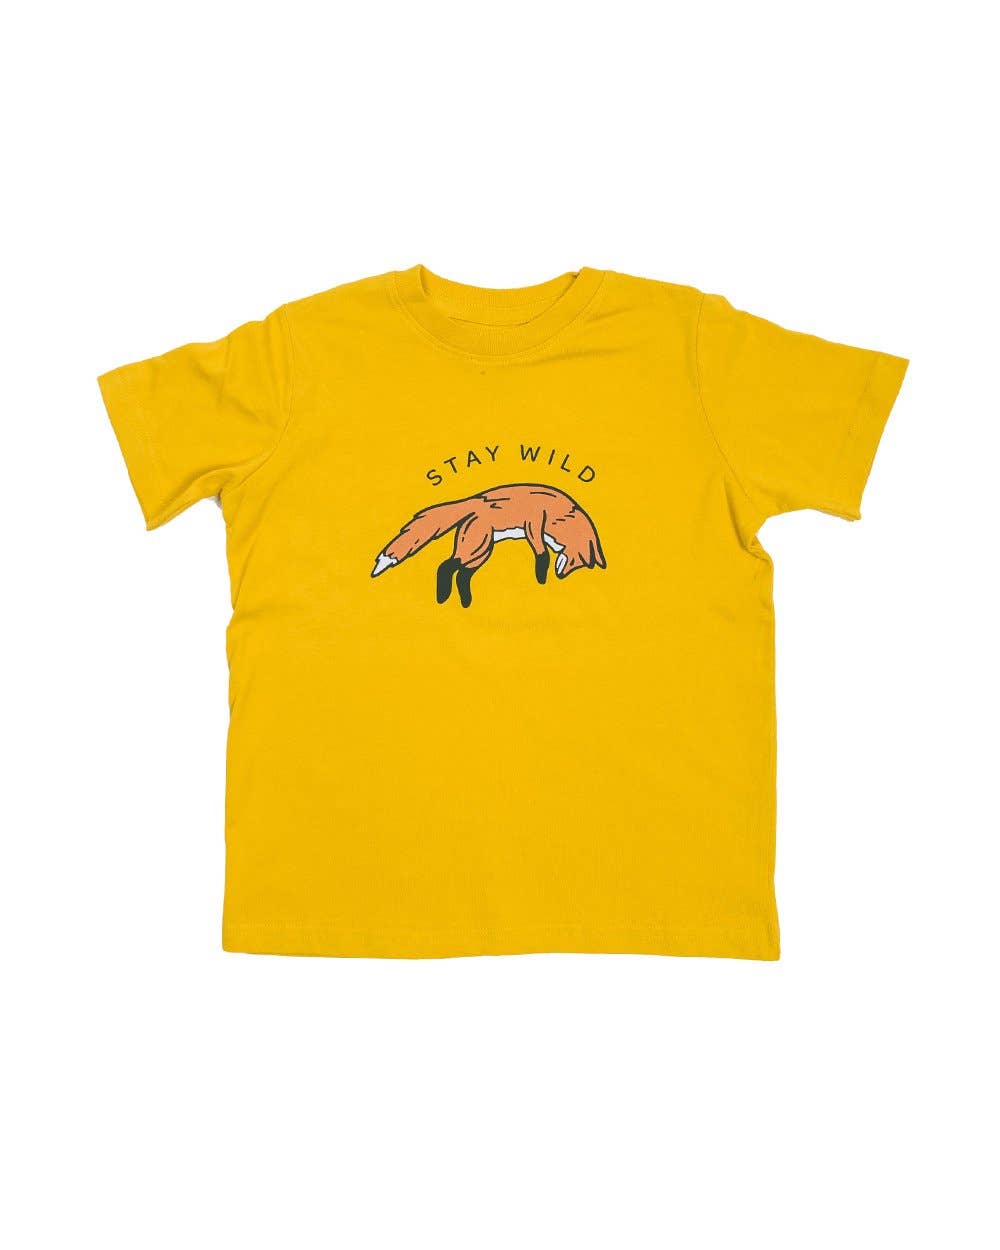 Stay Wild Yellow Fox Youth shirt by Keep Nature Wild